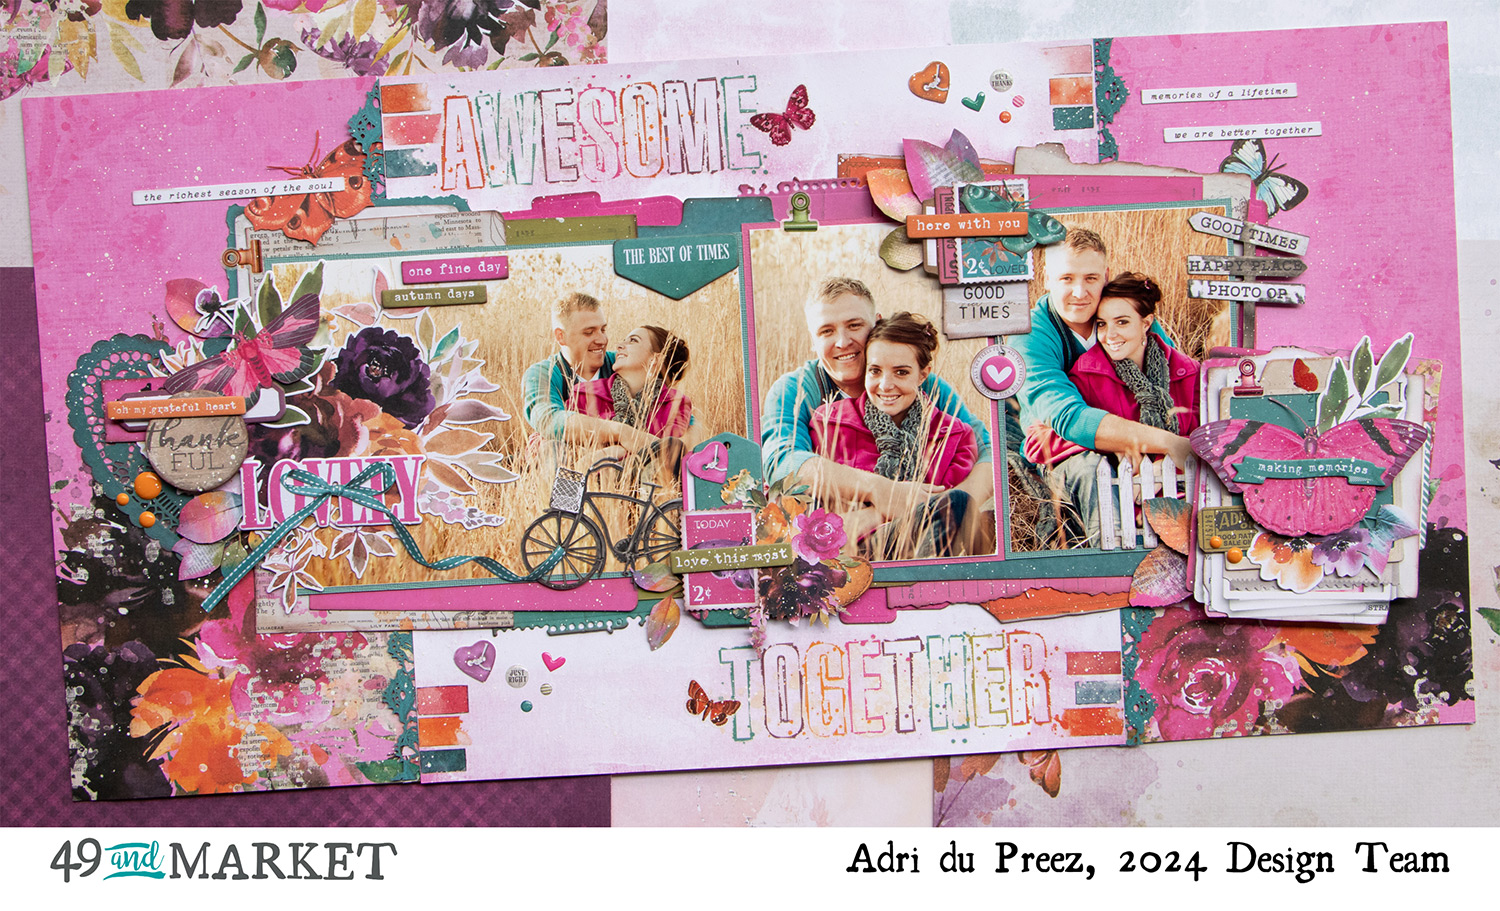 Awesome together - Double layout by Adri